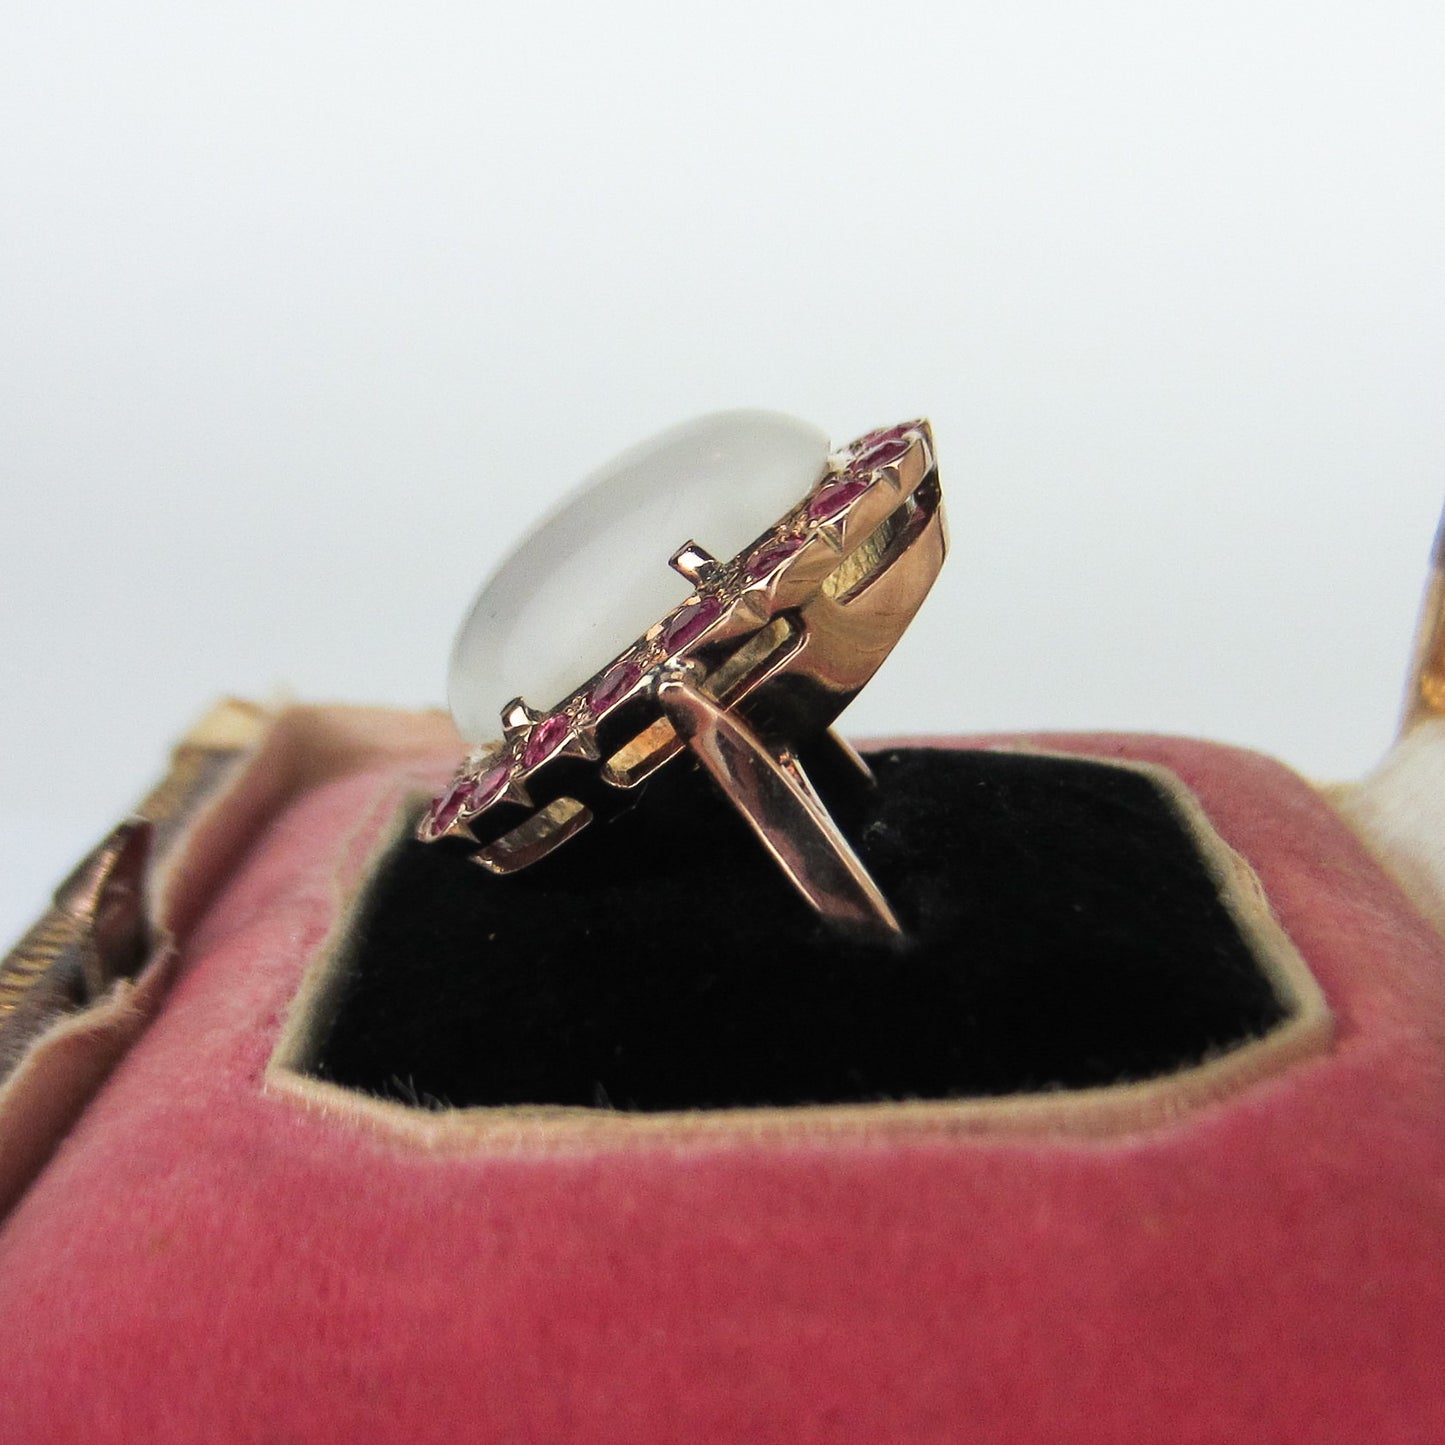 SOLD—Retro Moonstone and Ruby Ring 14k c. 1940